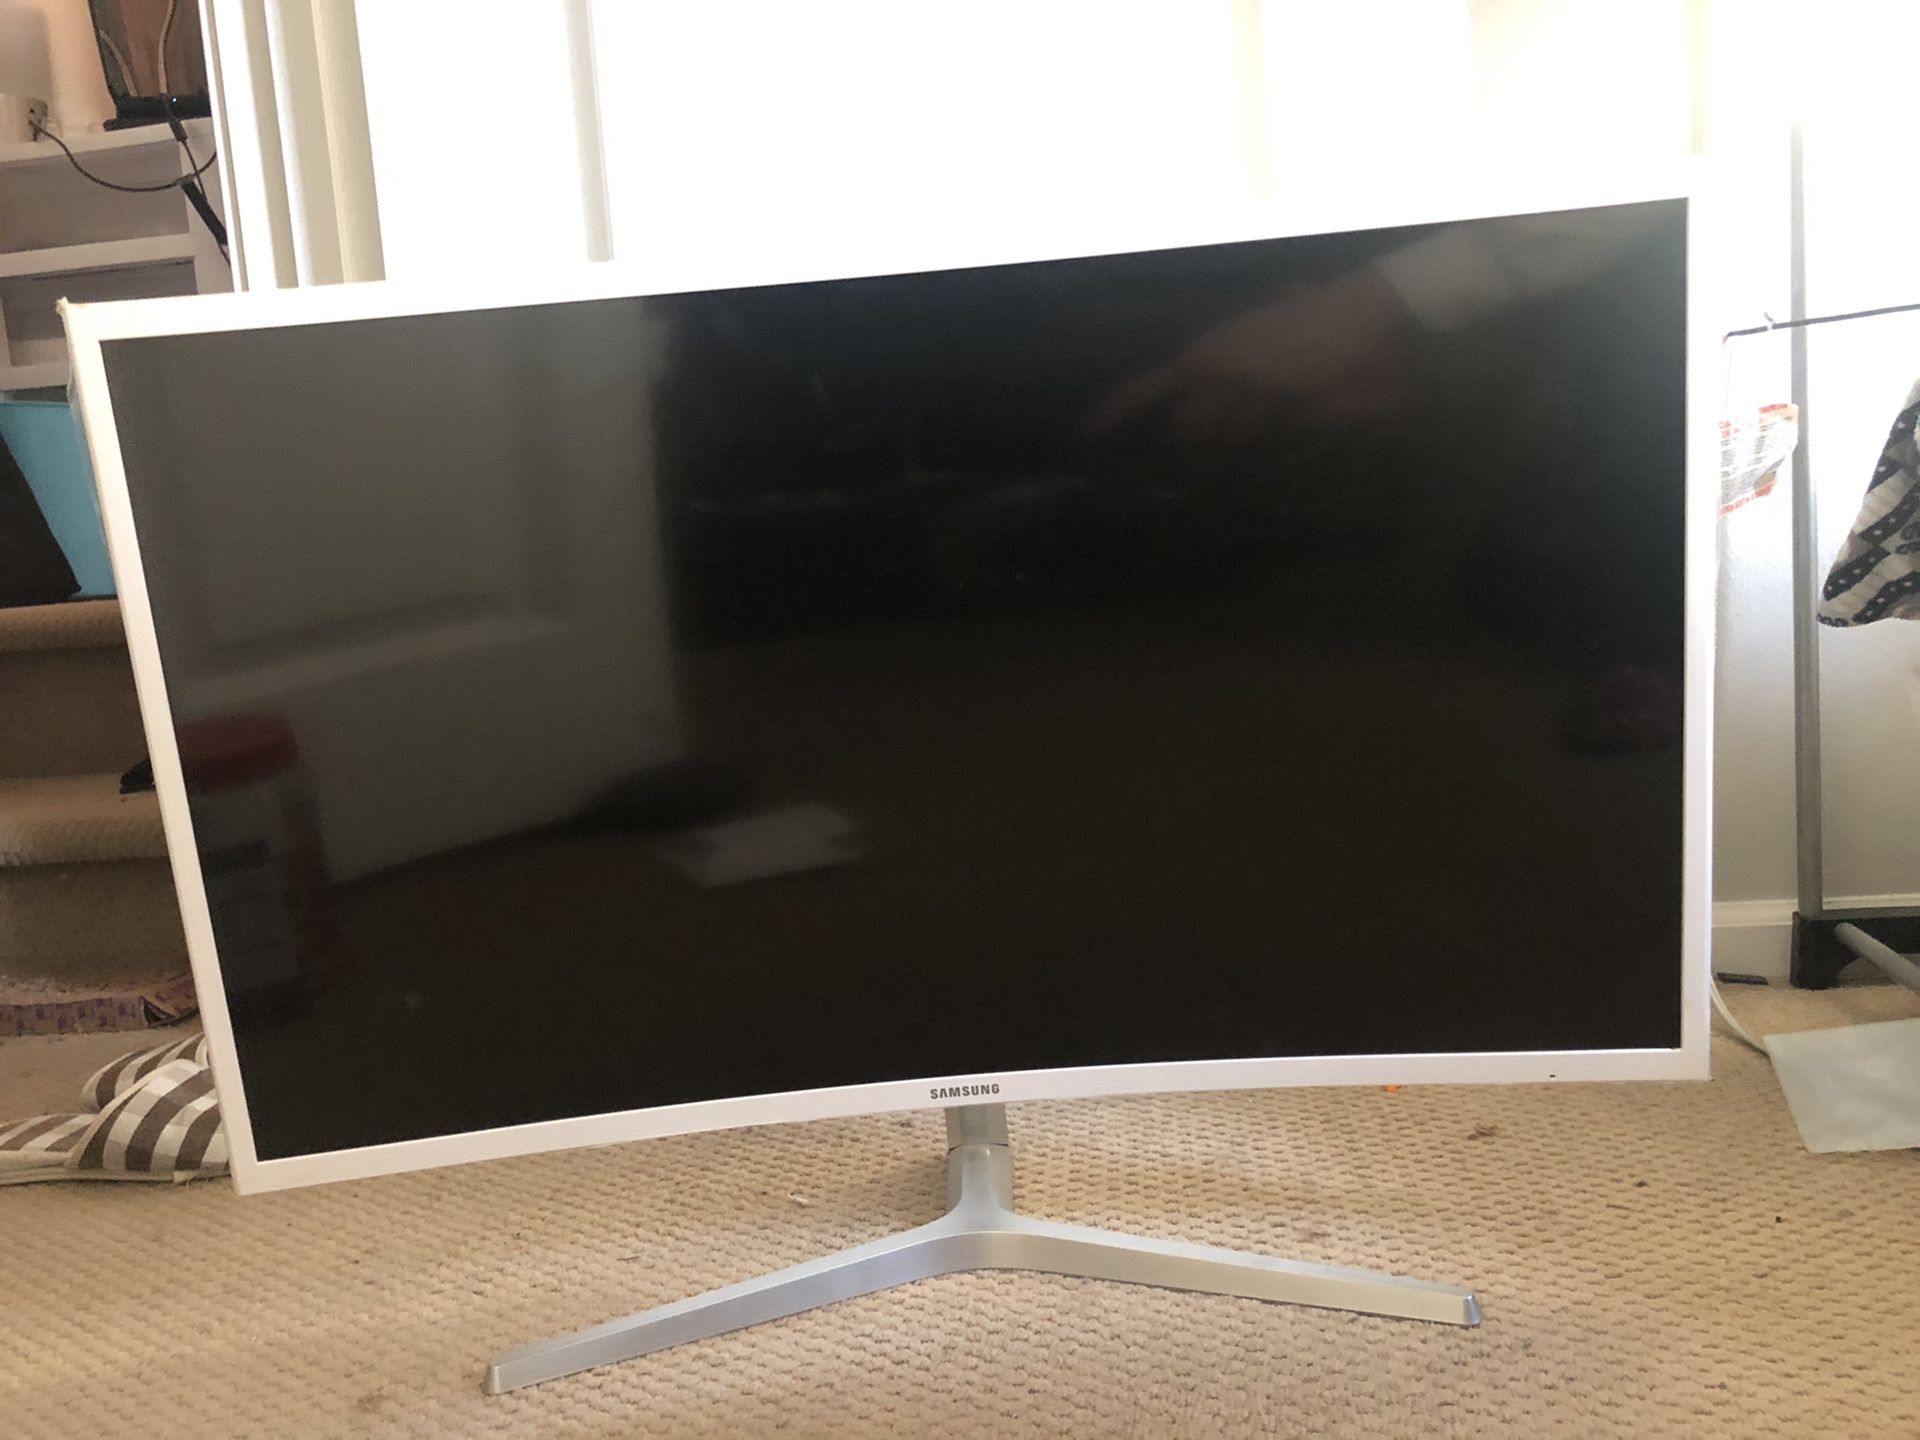 Samsung 32’ curved monitor